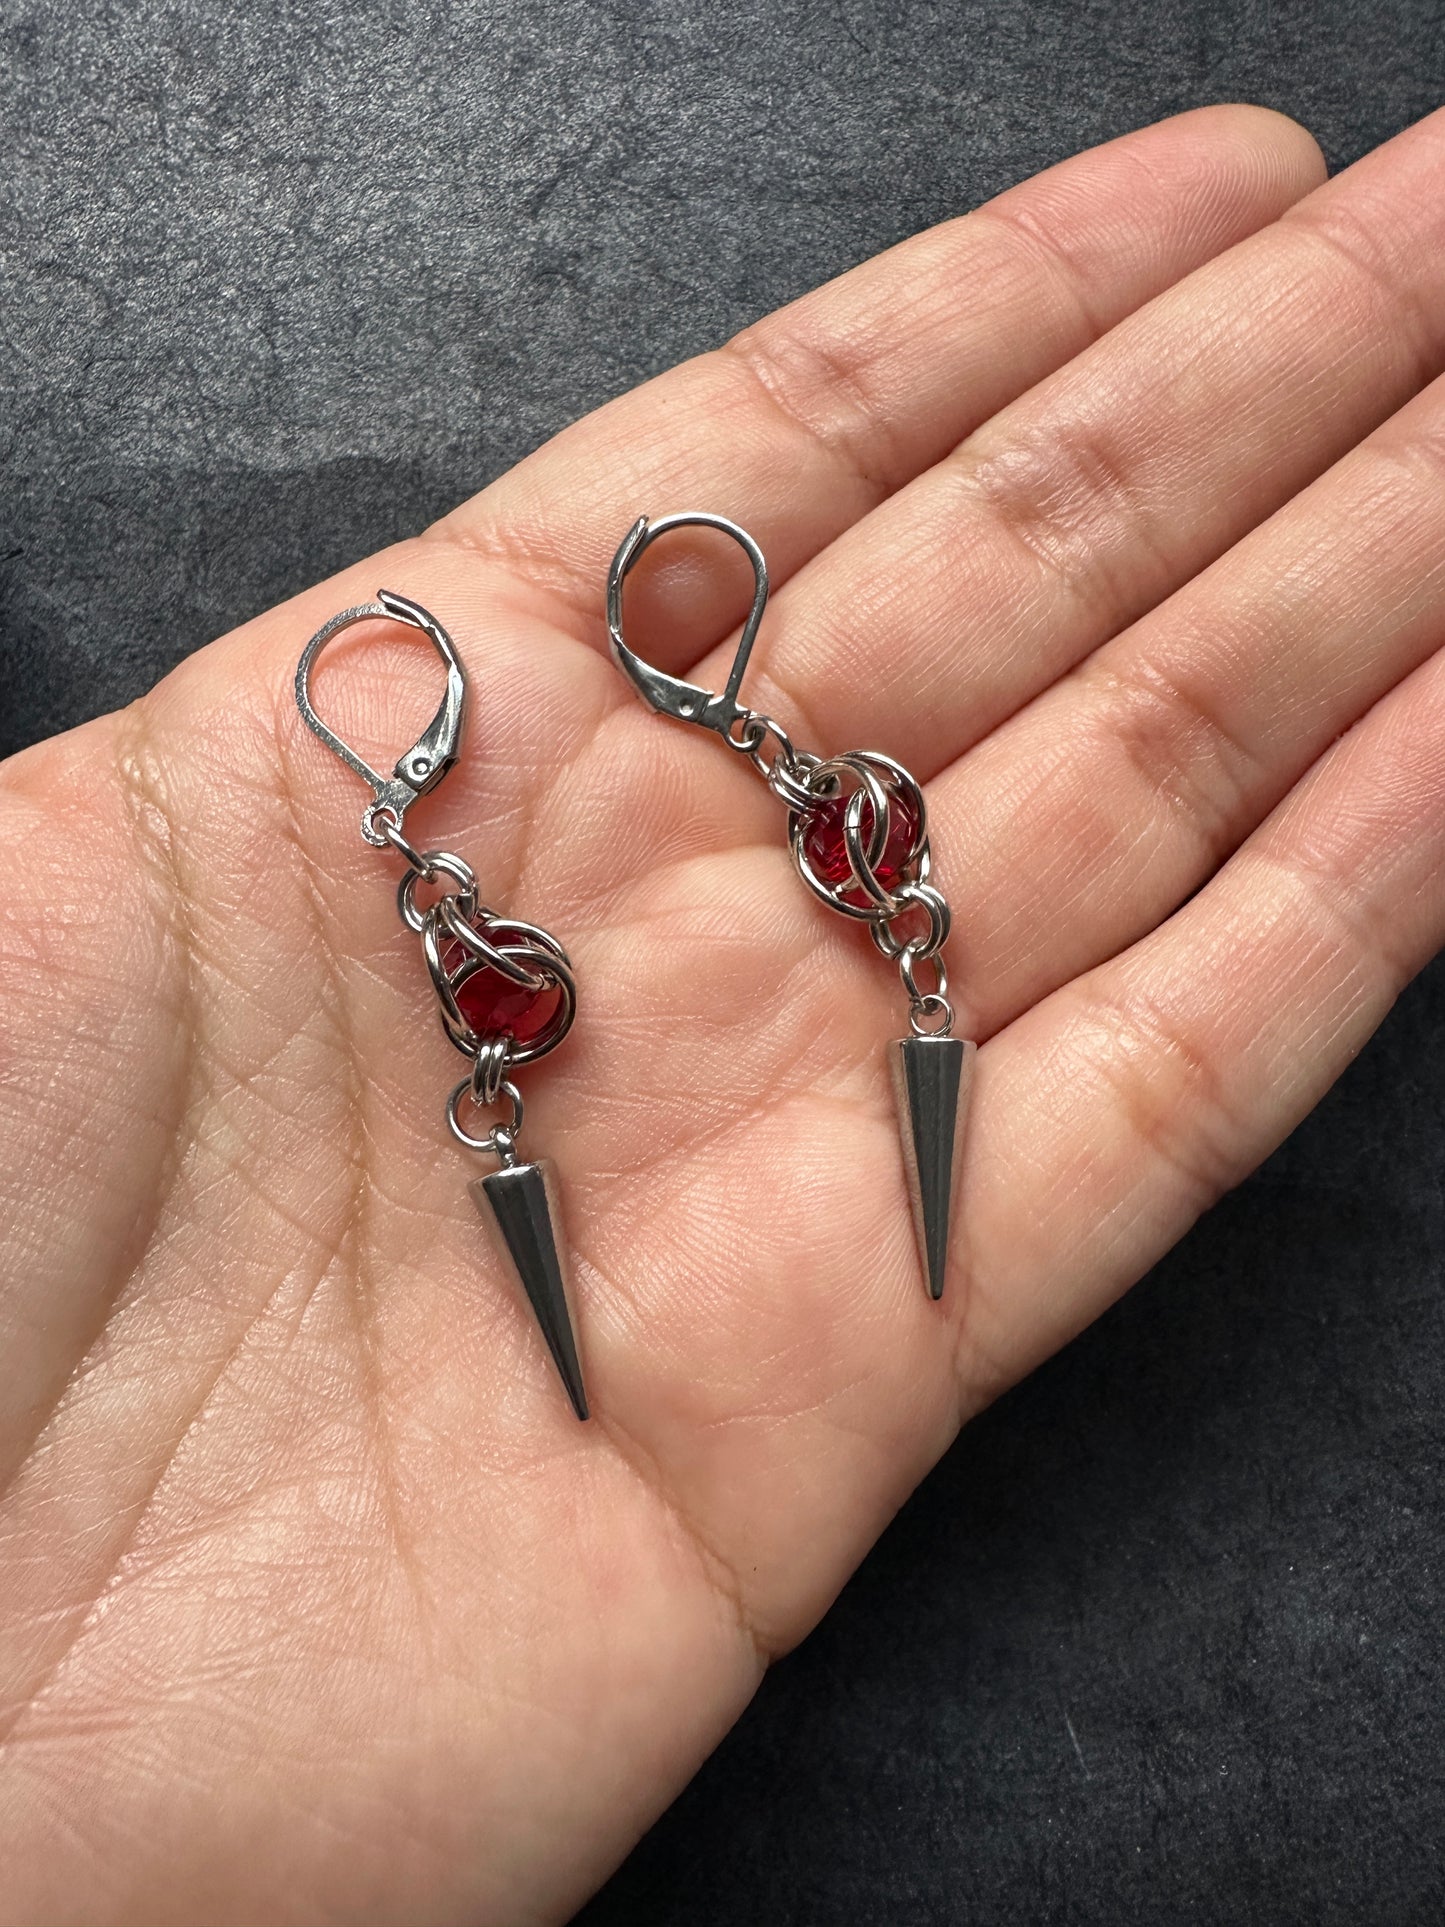 Stainless steel chainmaille and red crystal earrings